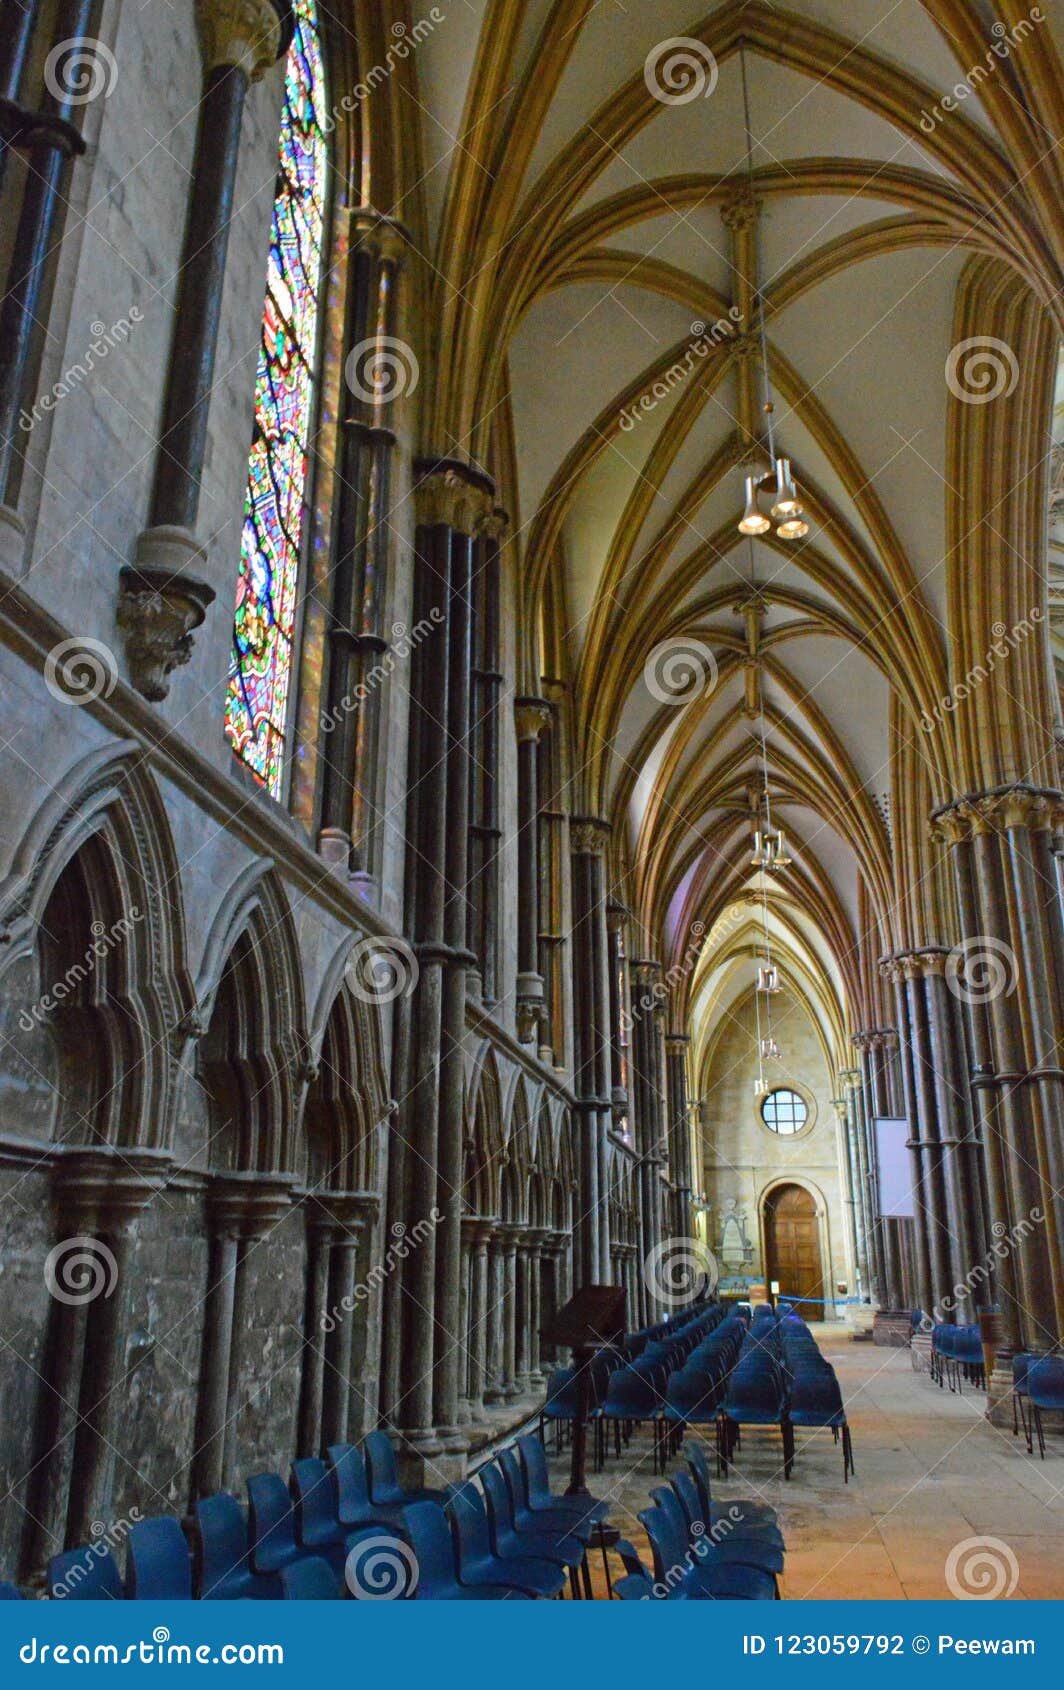 Lincoln Cathedral Nave Crazy Vaulted Ceiling Stock Photo Image